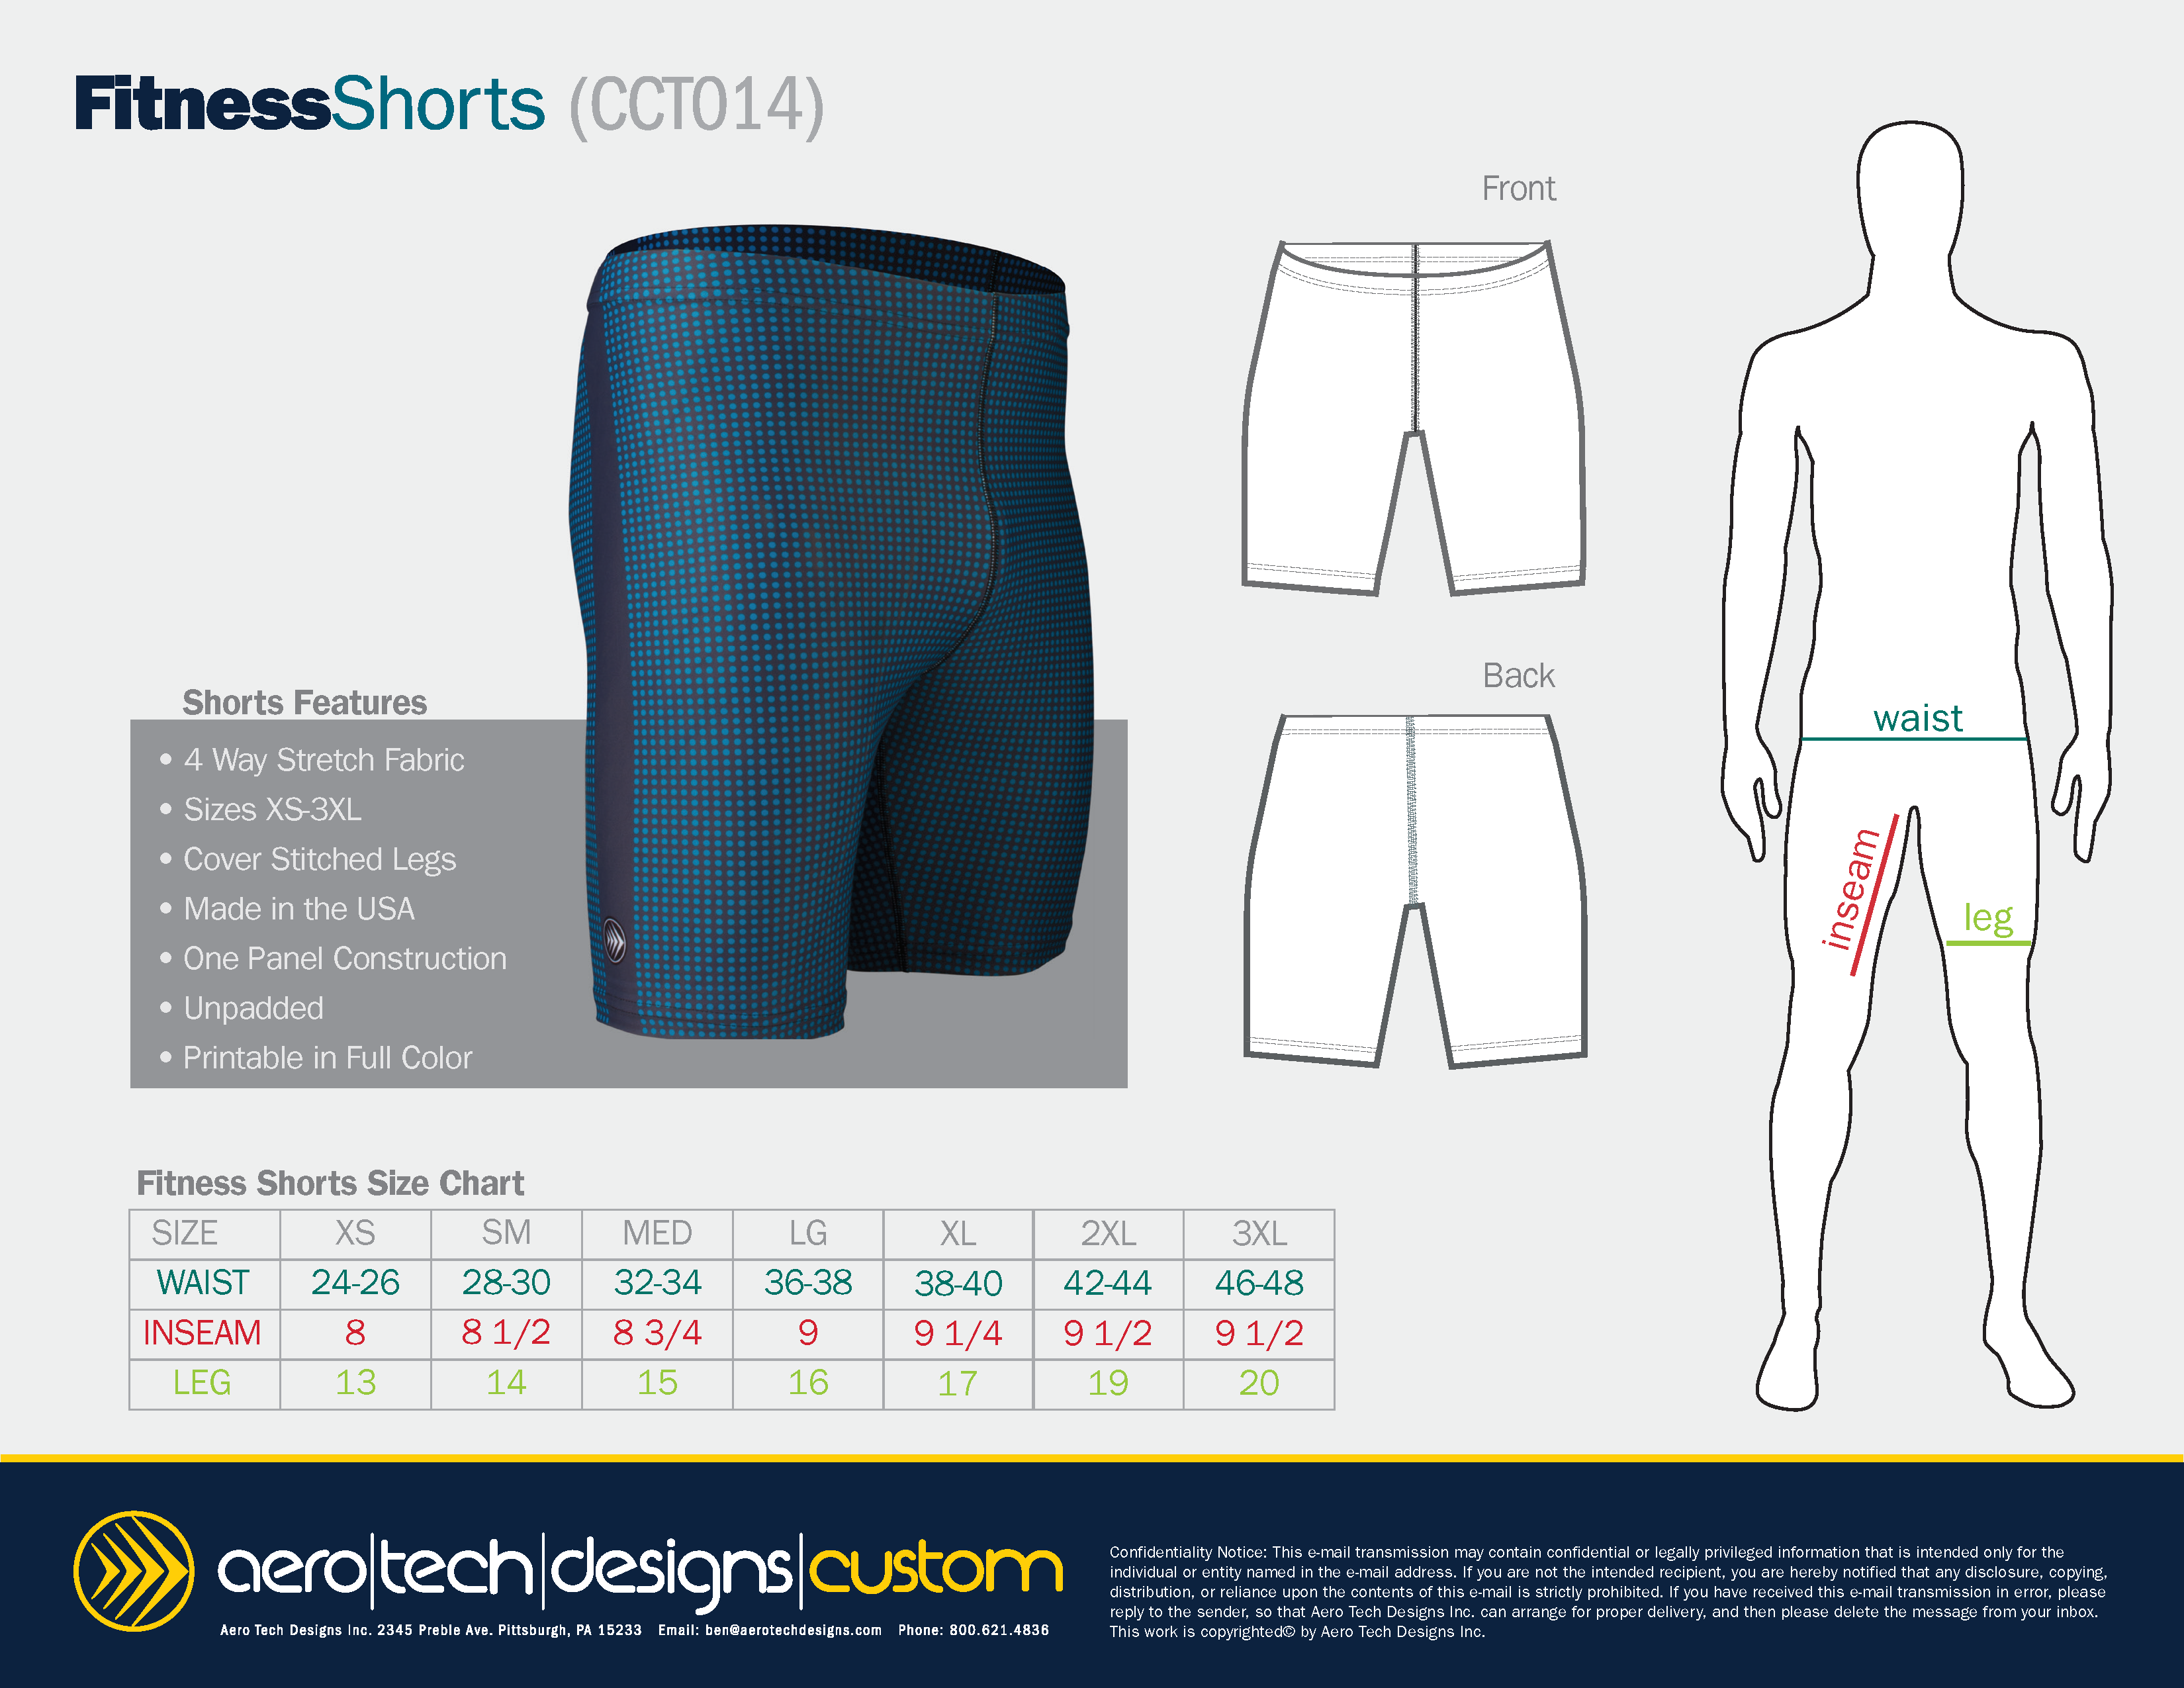 size-chart-fitnessshorts-cct014.png